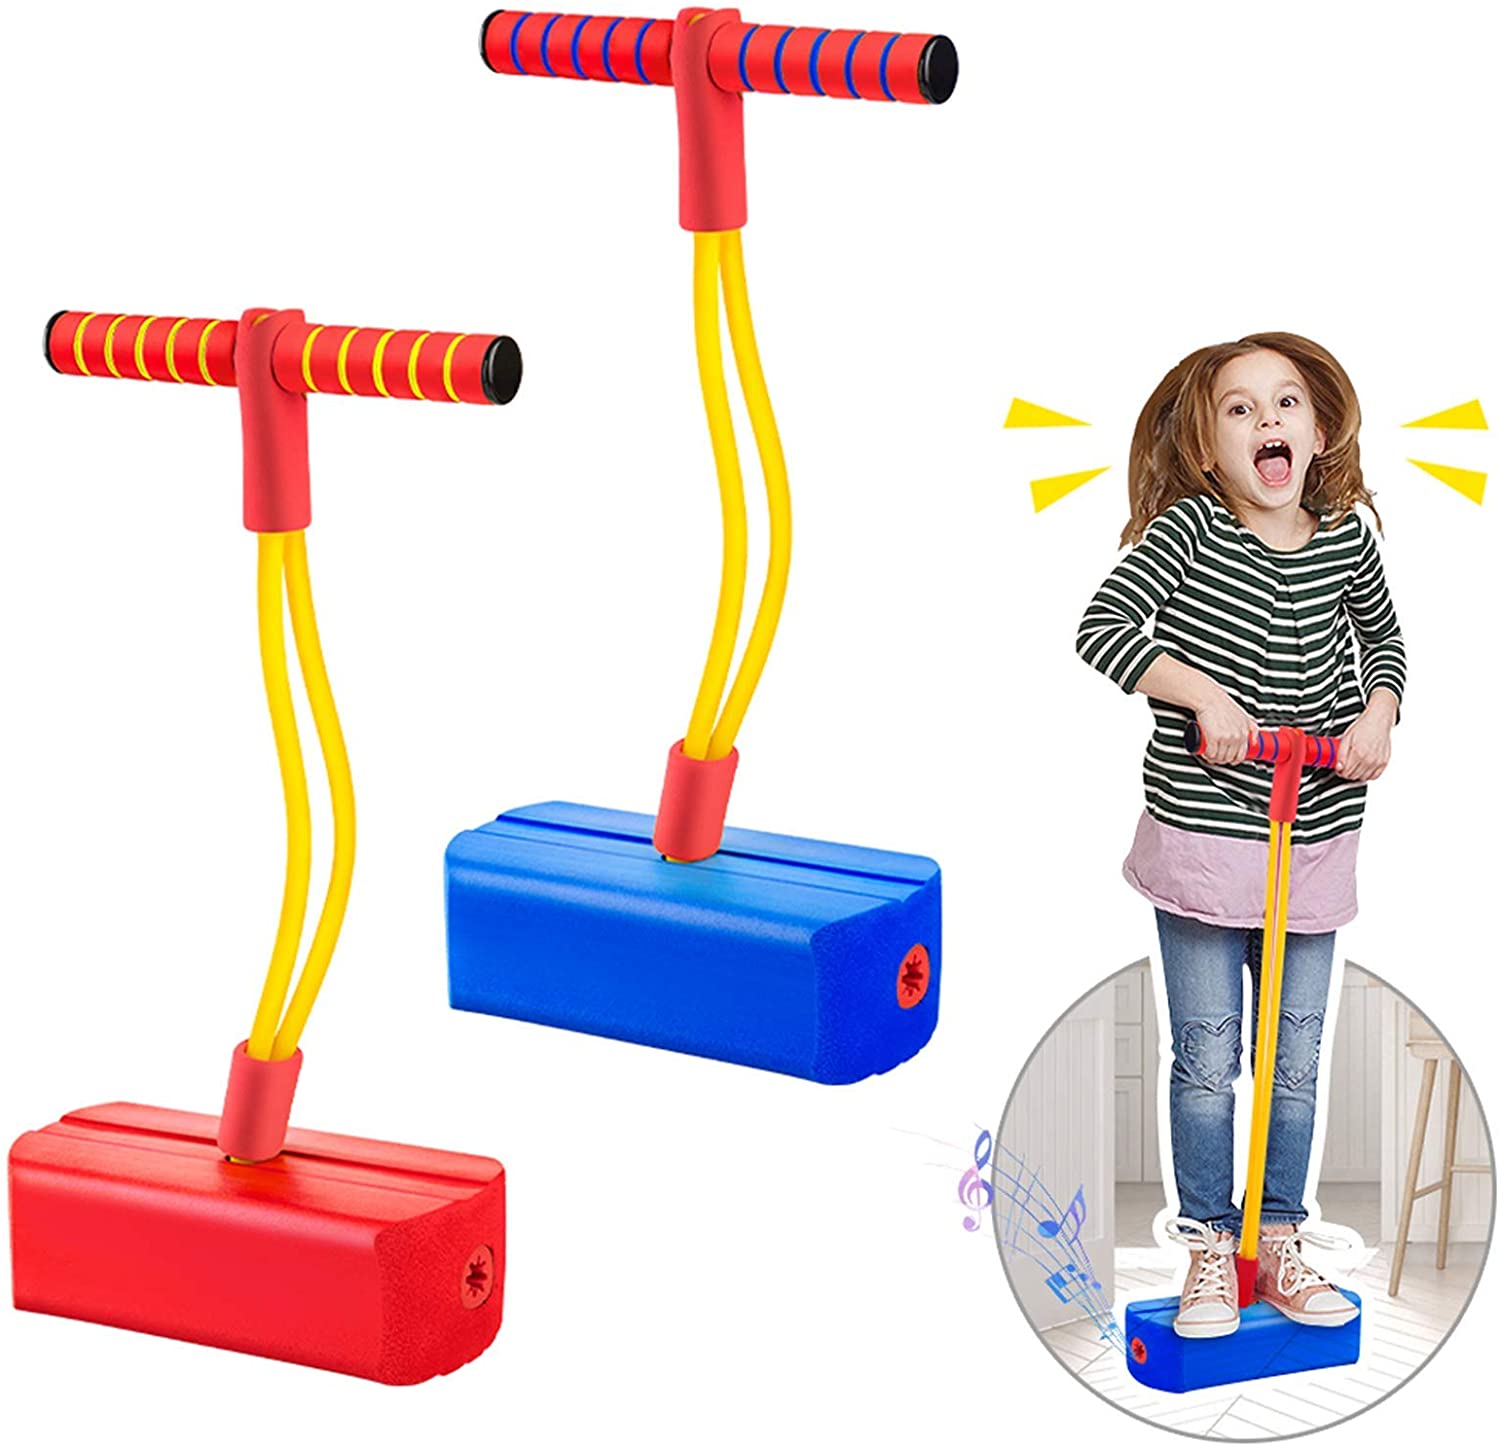 Hot Selling Fun and Safe Pogo Stick, Durable Foam and Bungee Jumper, Foam Pogo Jumper for Kids